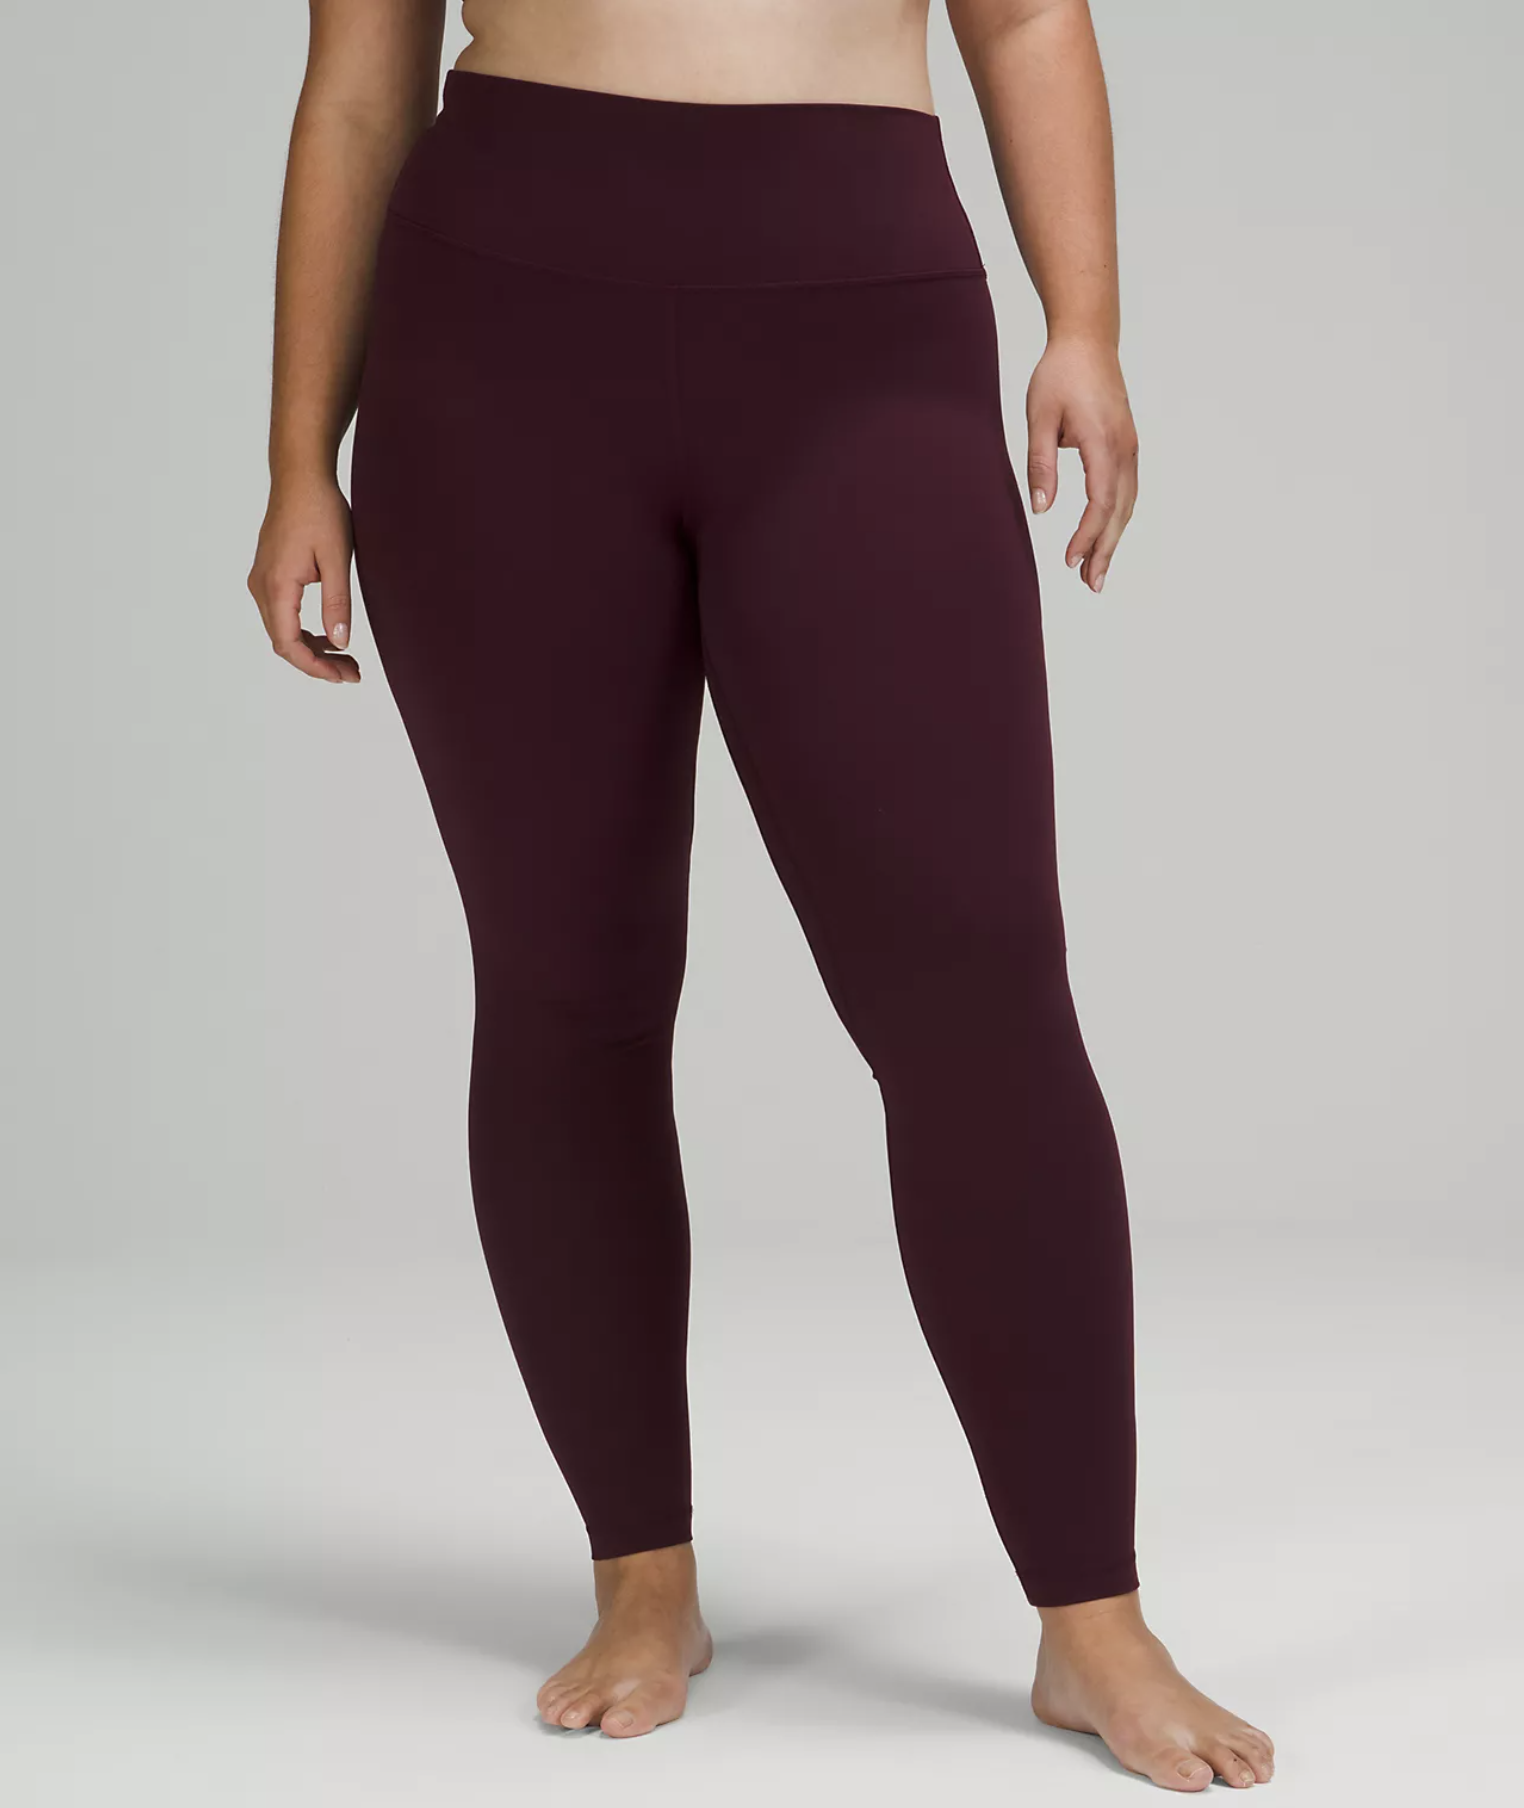 16 Best Leggings of 2023 Tested in Our Labs